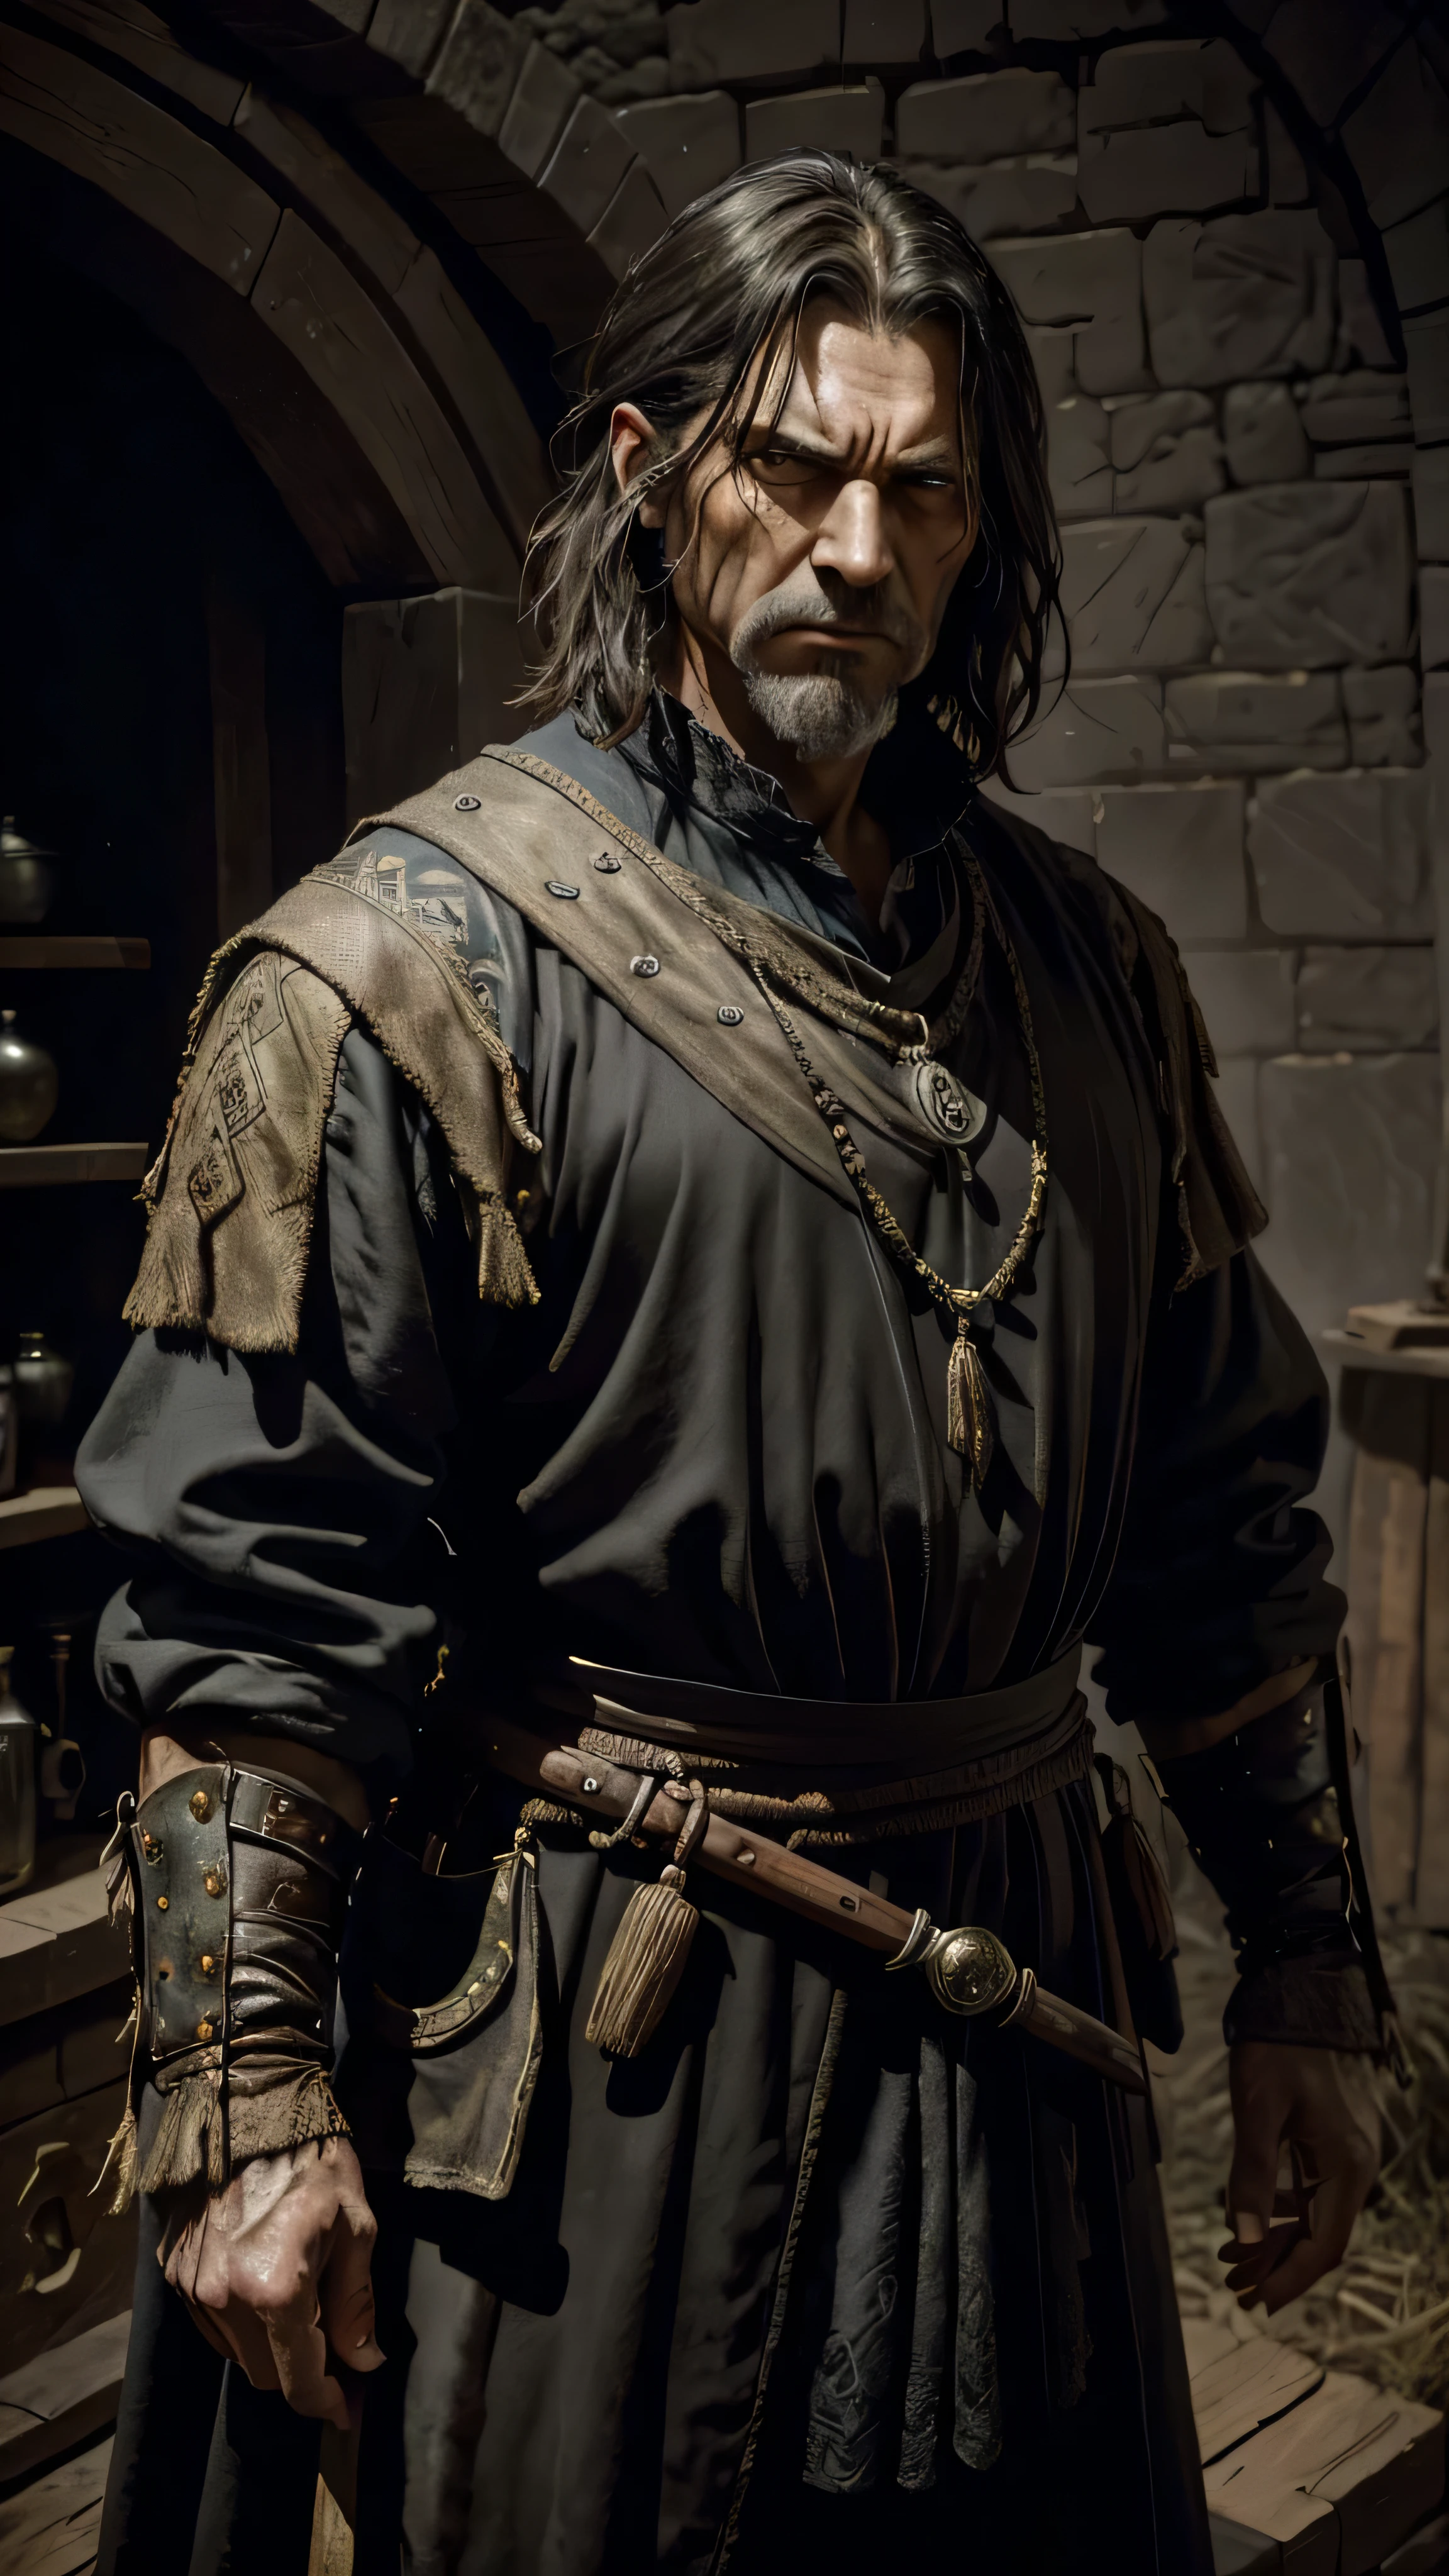 A mesmerizing, award-winning oil painting by Aleksi Briclot, Style-Crypt's Style, showcases an older male medieval peasant with a brooding, sinister demeanor. The scene is illuminated by backlighting, casting dramatic shadows and highlighting the intricate details of the subject's weathered face and worn clothing. The painting is executed with smooth strokes and sharp focus, following the rule of thirds for a captivating composition. The peasant's dark fantasy world is hinted at through intricate details in his attire, and his angry expression speaks volumes of his inner turmoil. The painting is presented in a medium shot, with a shallow depth of